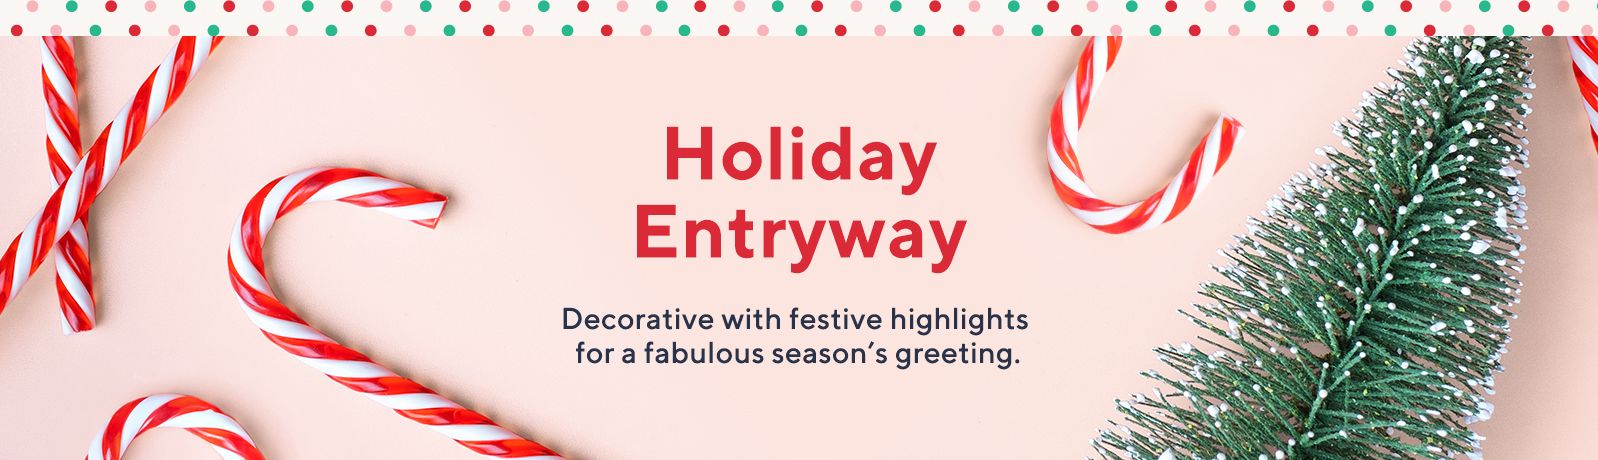 Holiday Entryway - Decorative with festive highlights for a fabulous season's greeting.